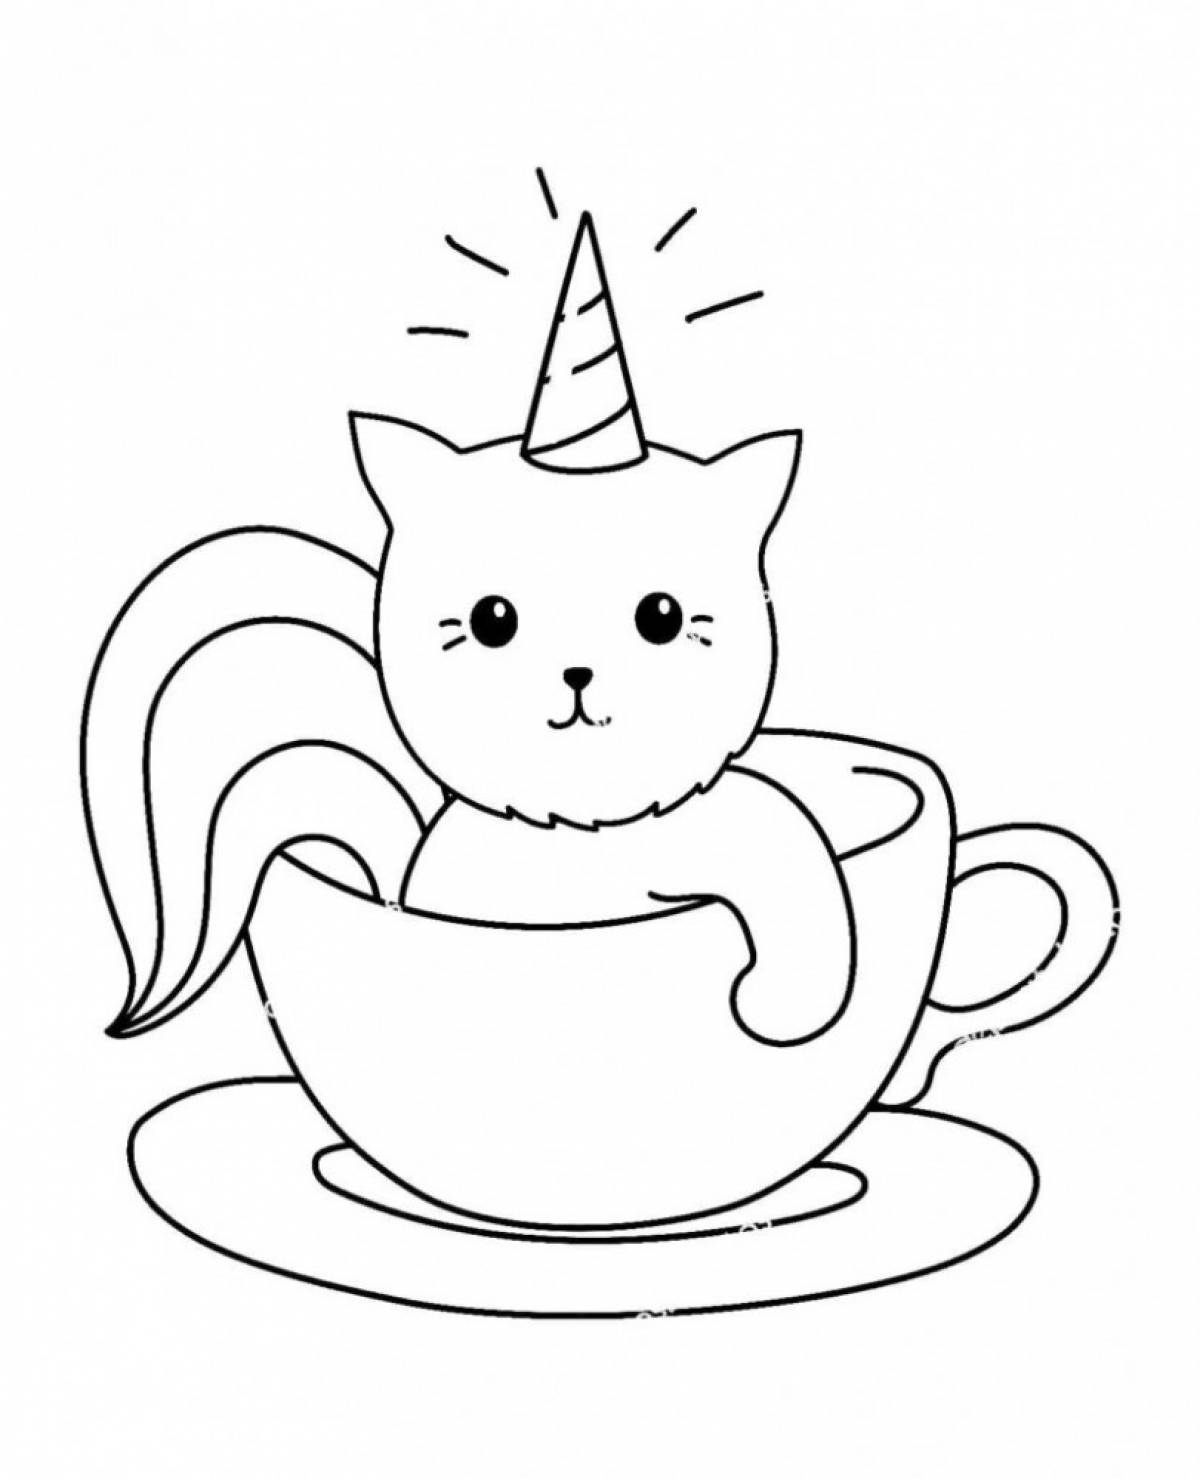 Attracting a cat in a cup coloring book